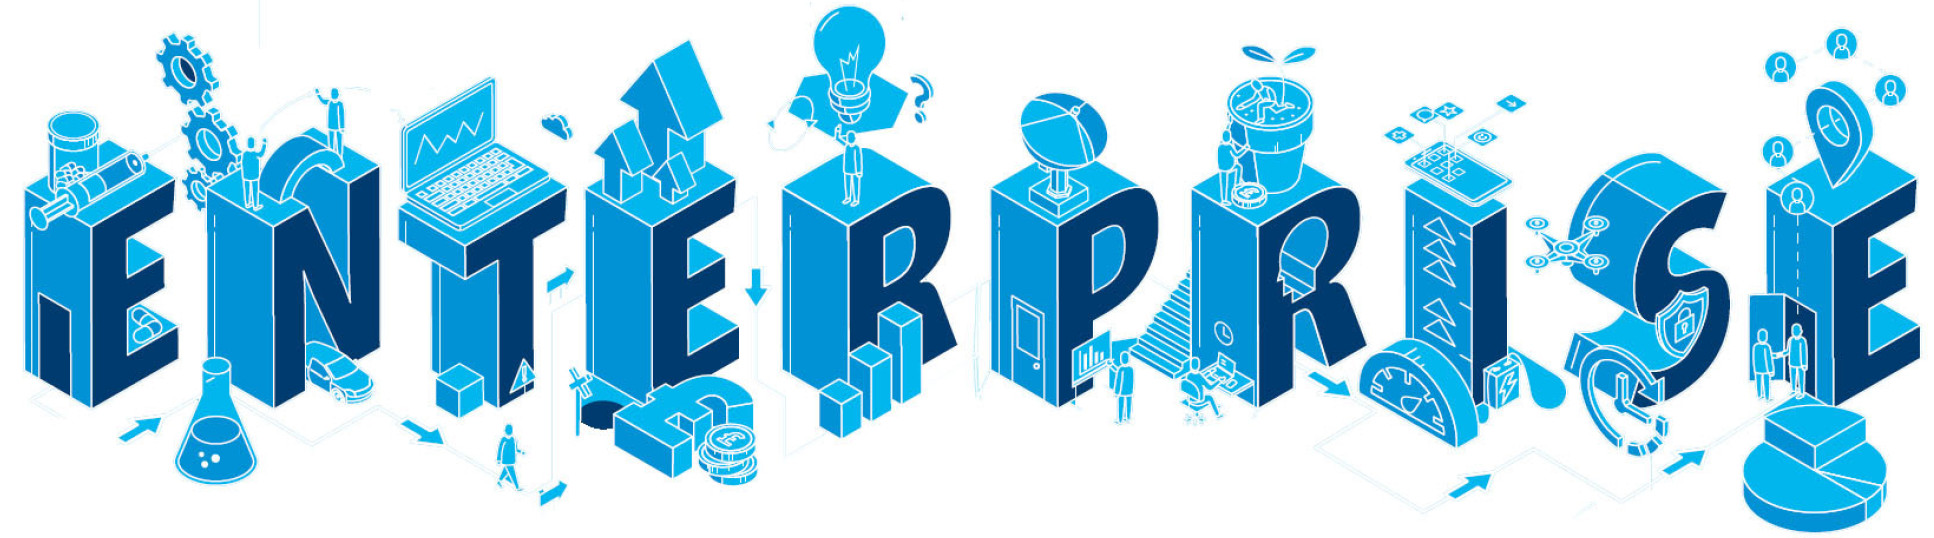 The word Enterprise surrounded by icons representing science and innovation